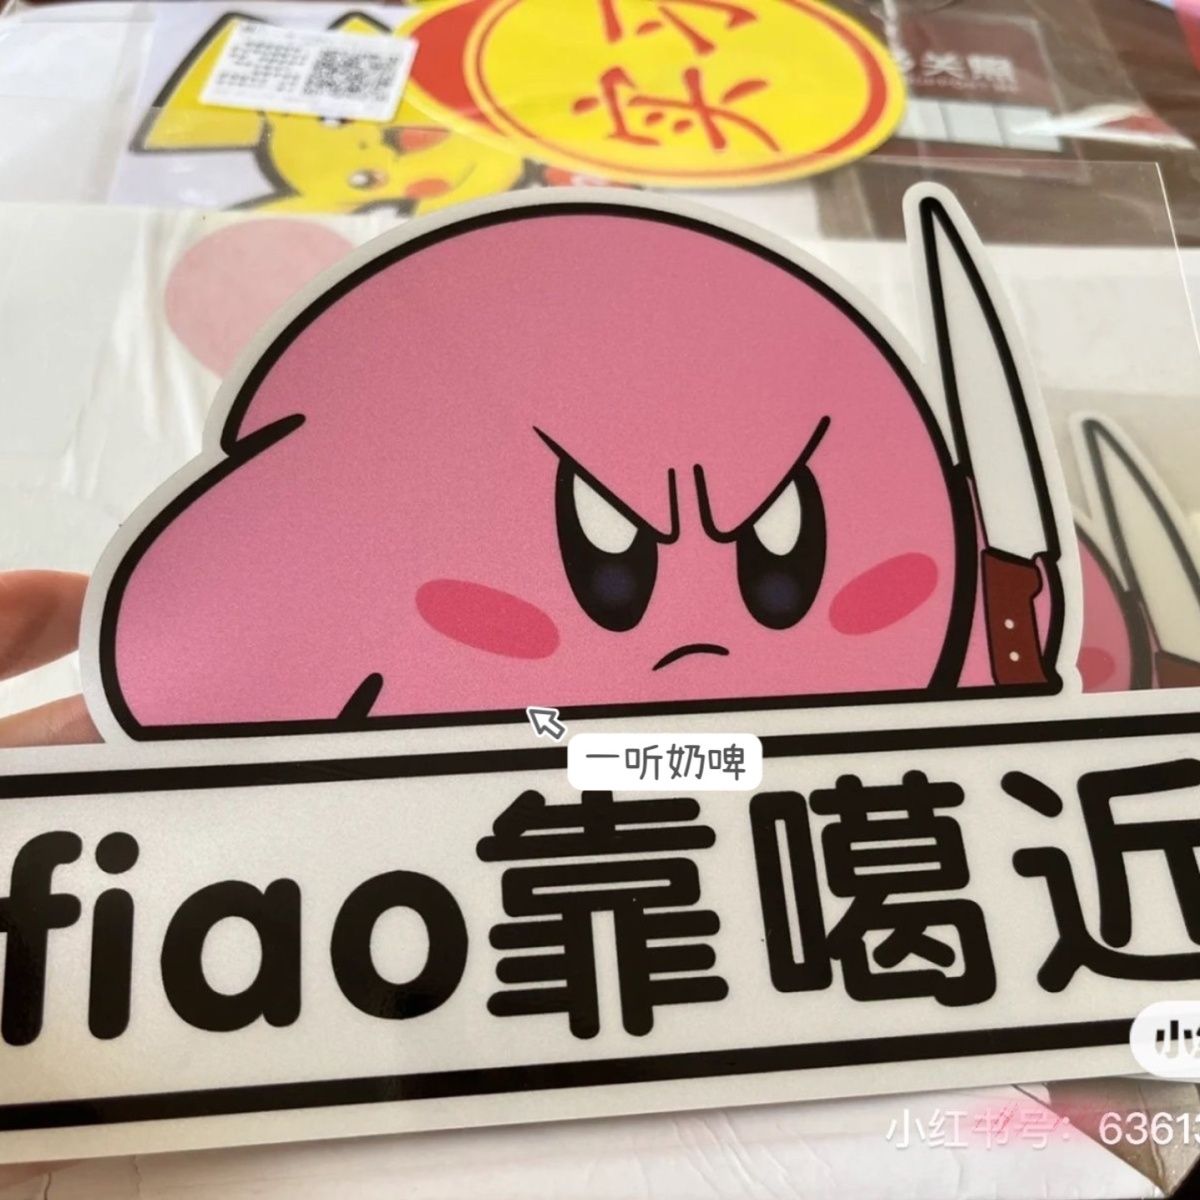 Fiao is close to funny car stickers car novice female driver domineering don't suffer from Lao Tzu stickers tiles Star Kirby